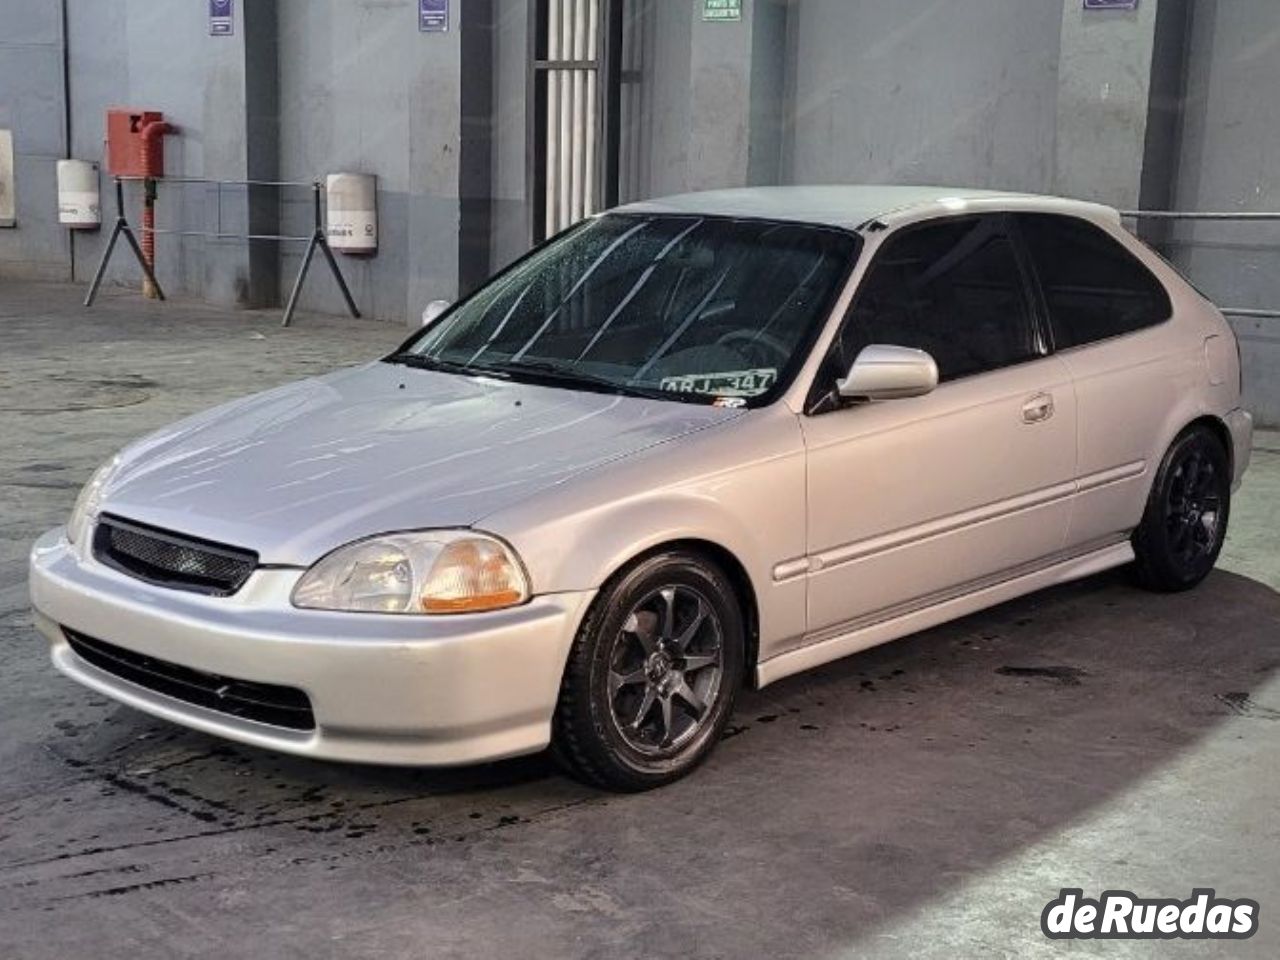 1999 Honda Civic Hatchback with California-legal JDM B16A Swap, Type R  styling and Porsche Paint